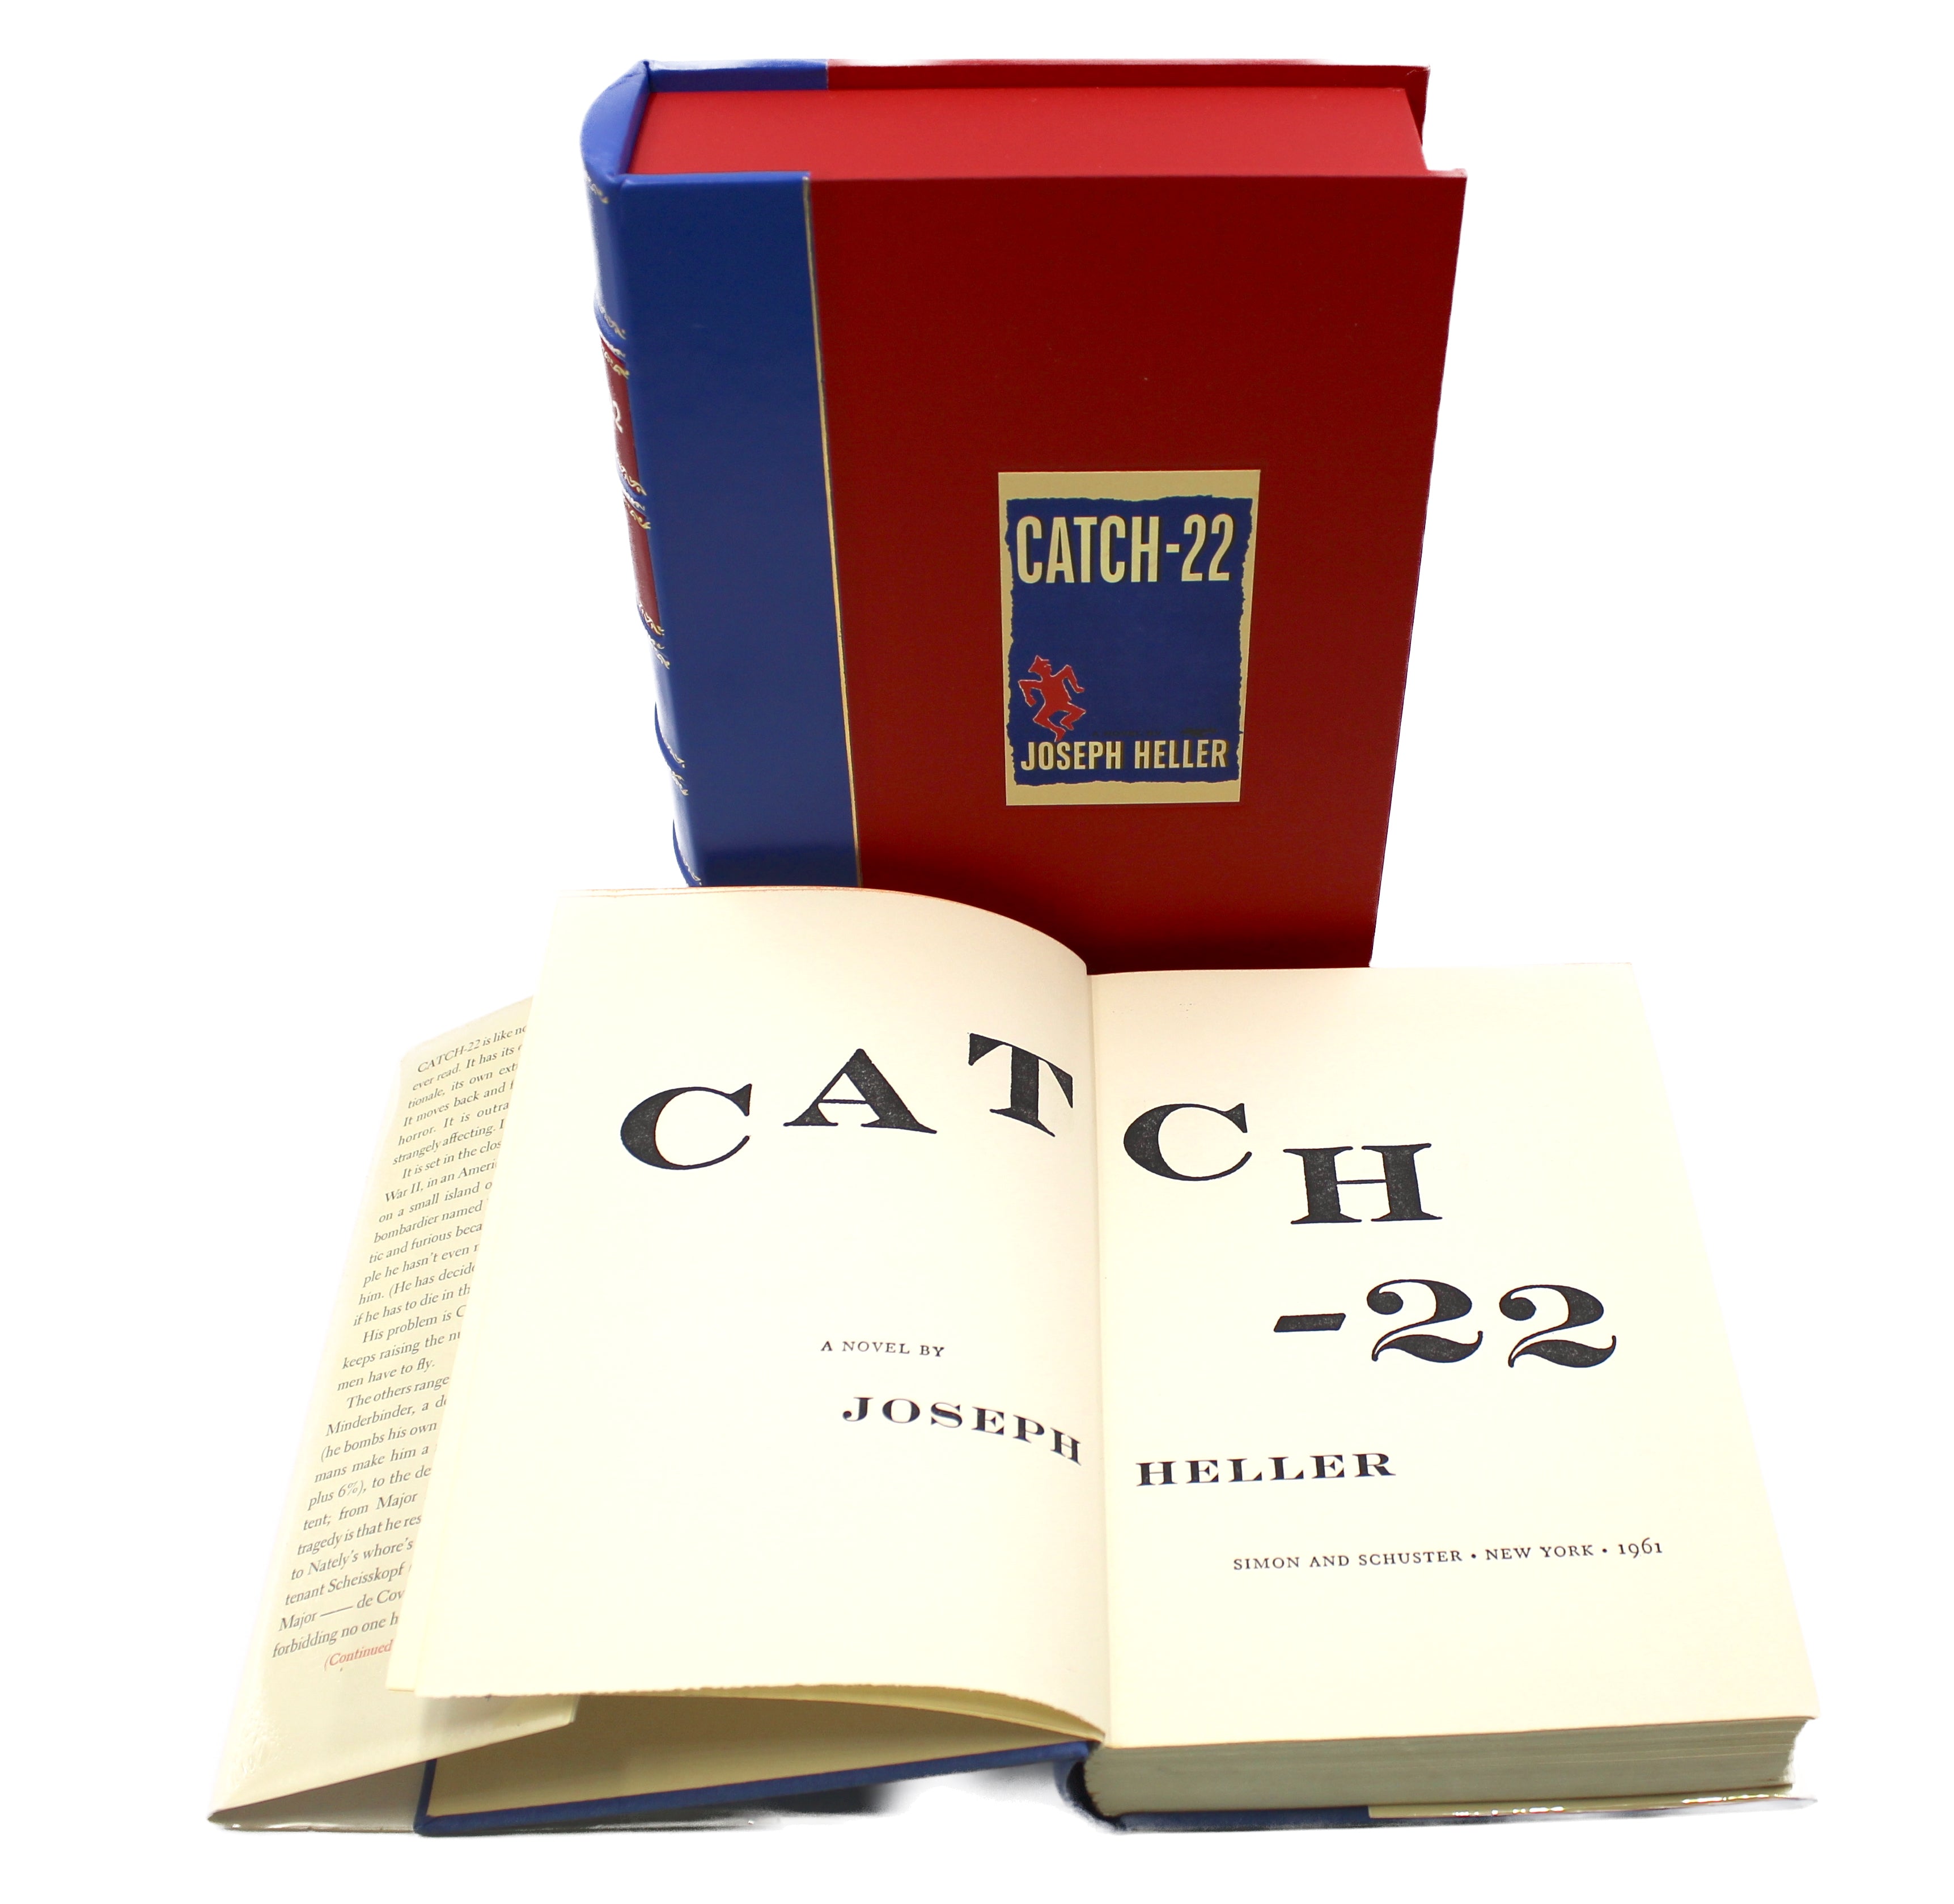 Catch-22 by Joseph Heller, First Edition, First Printing, in